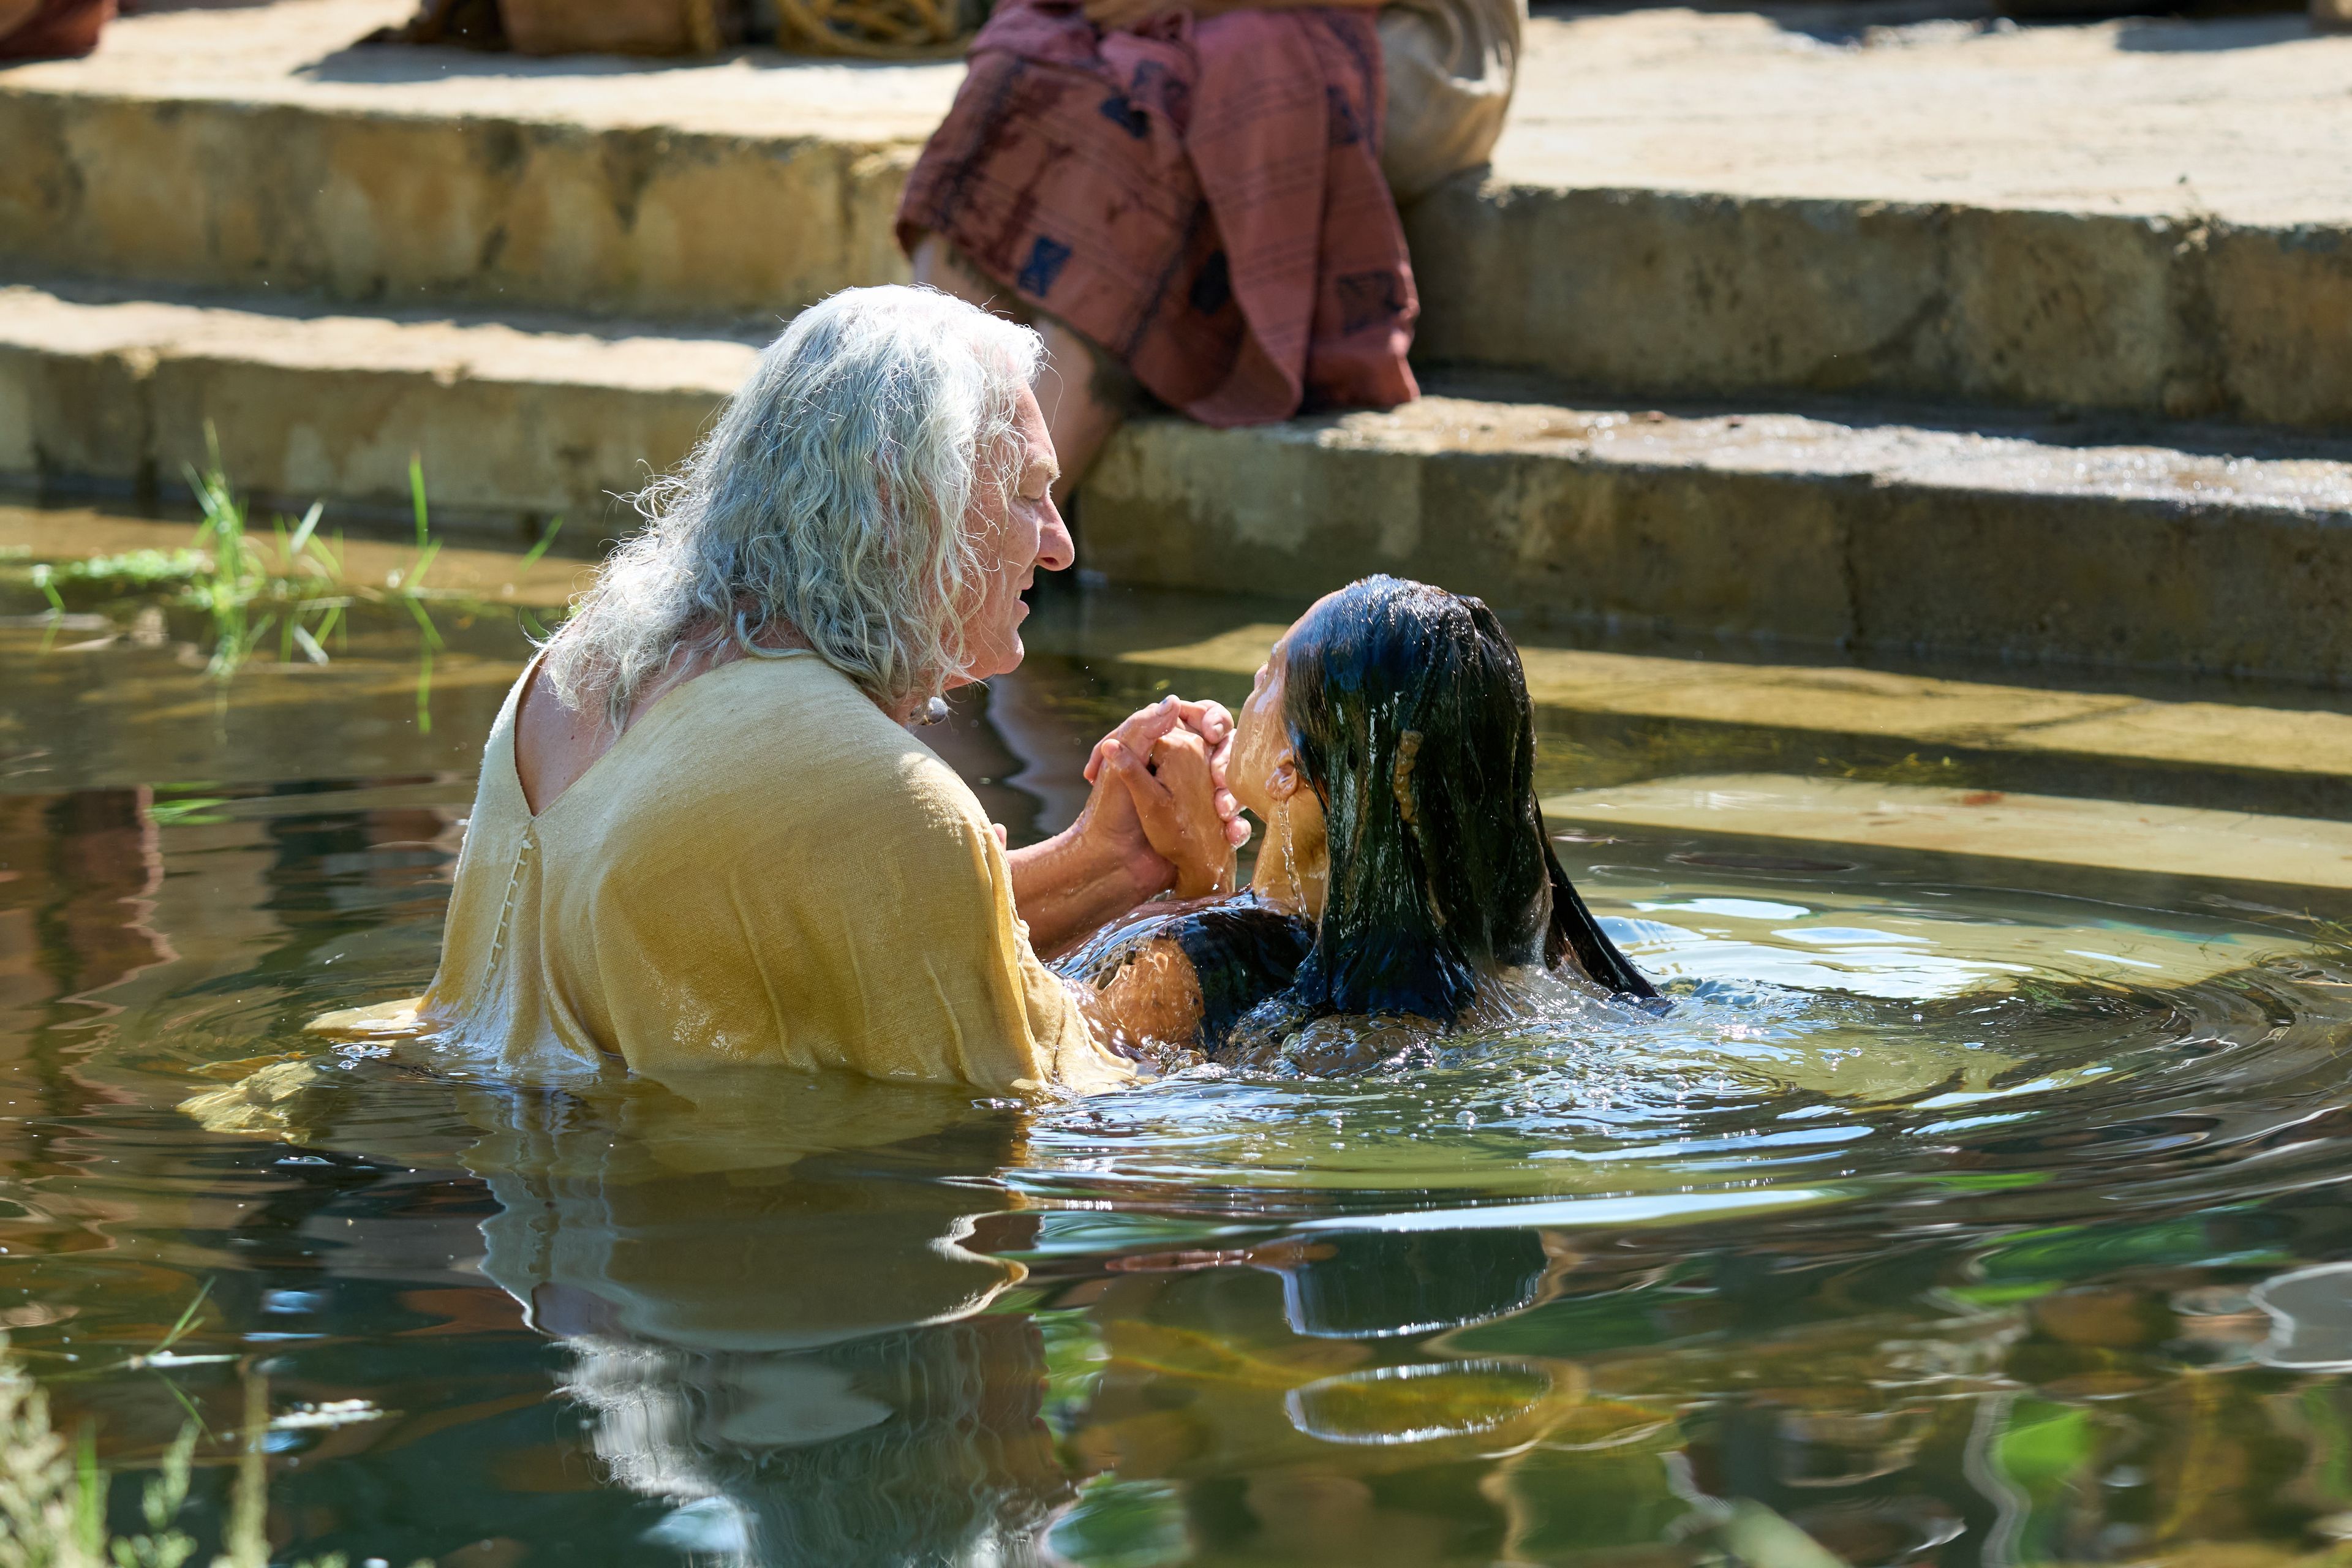 Nephi baptizes a woman in a pool of water. He had previously been set apart and given the authority by the resurrected Savior, Jesus Christ.